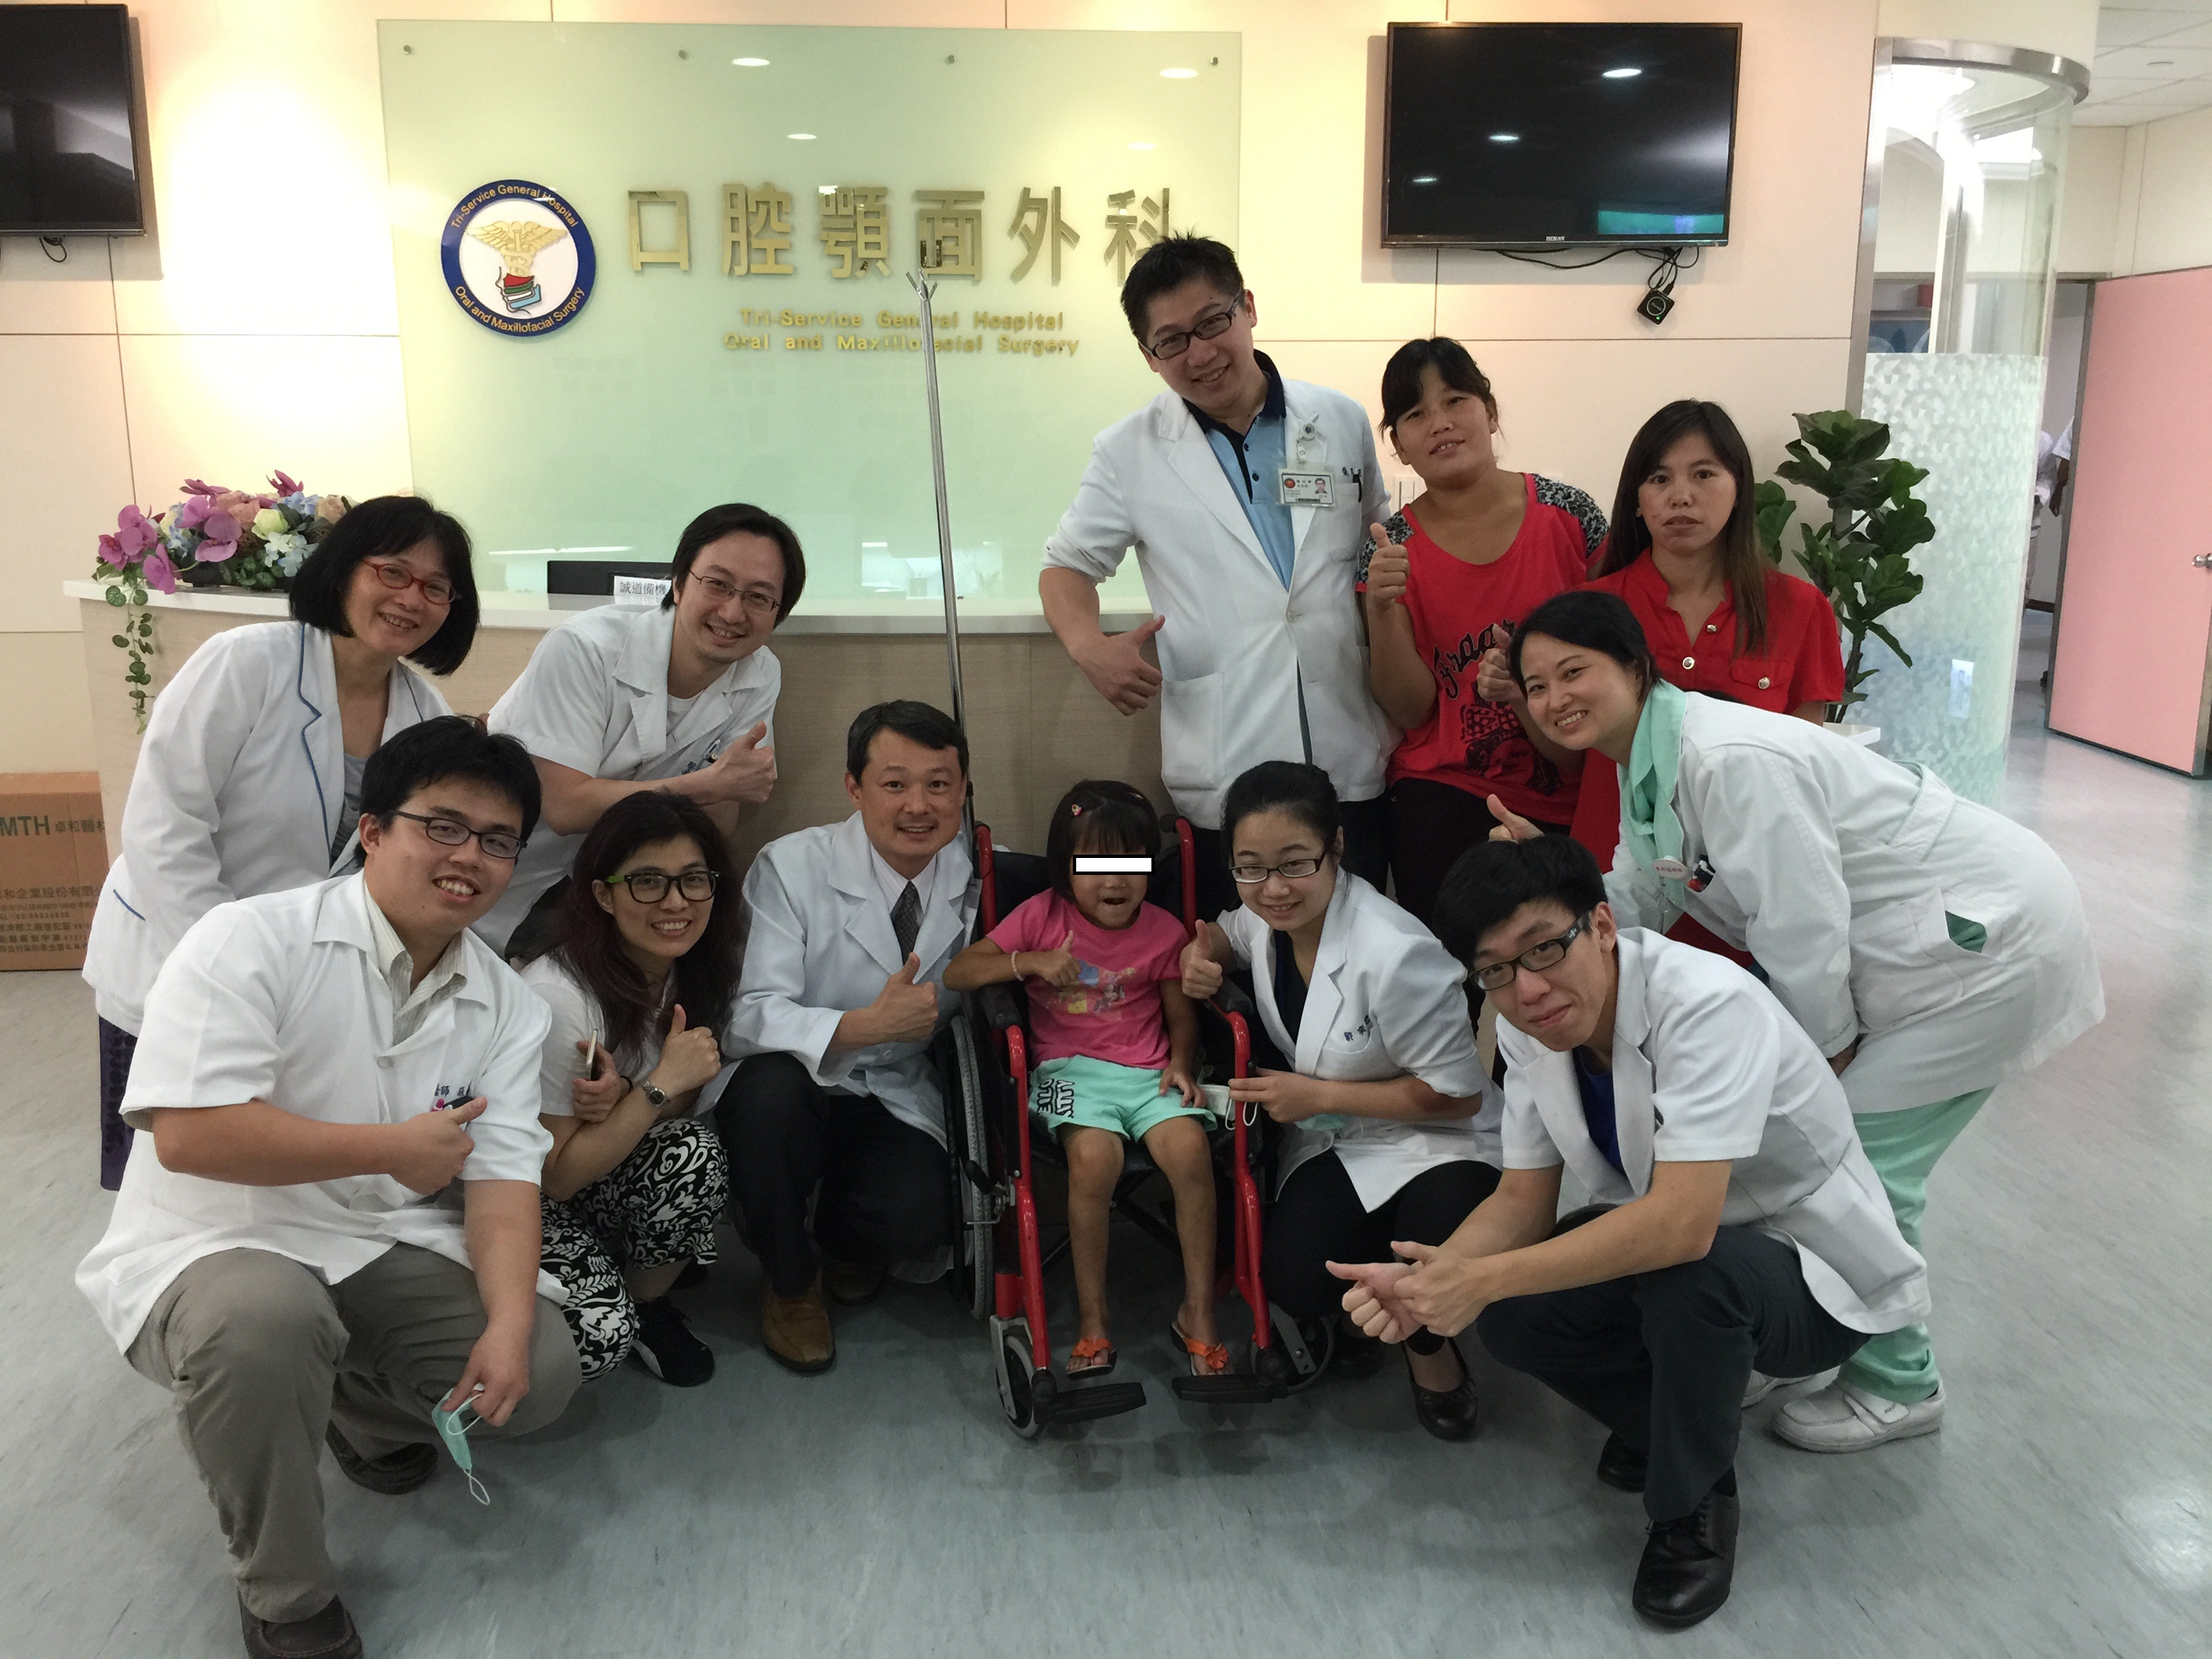 Love from the Tri-Service General Hospital Oral Maxillofacial Surgery team knows no boundary – A second chance at life for Myanmar girl.